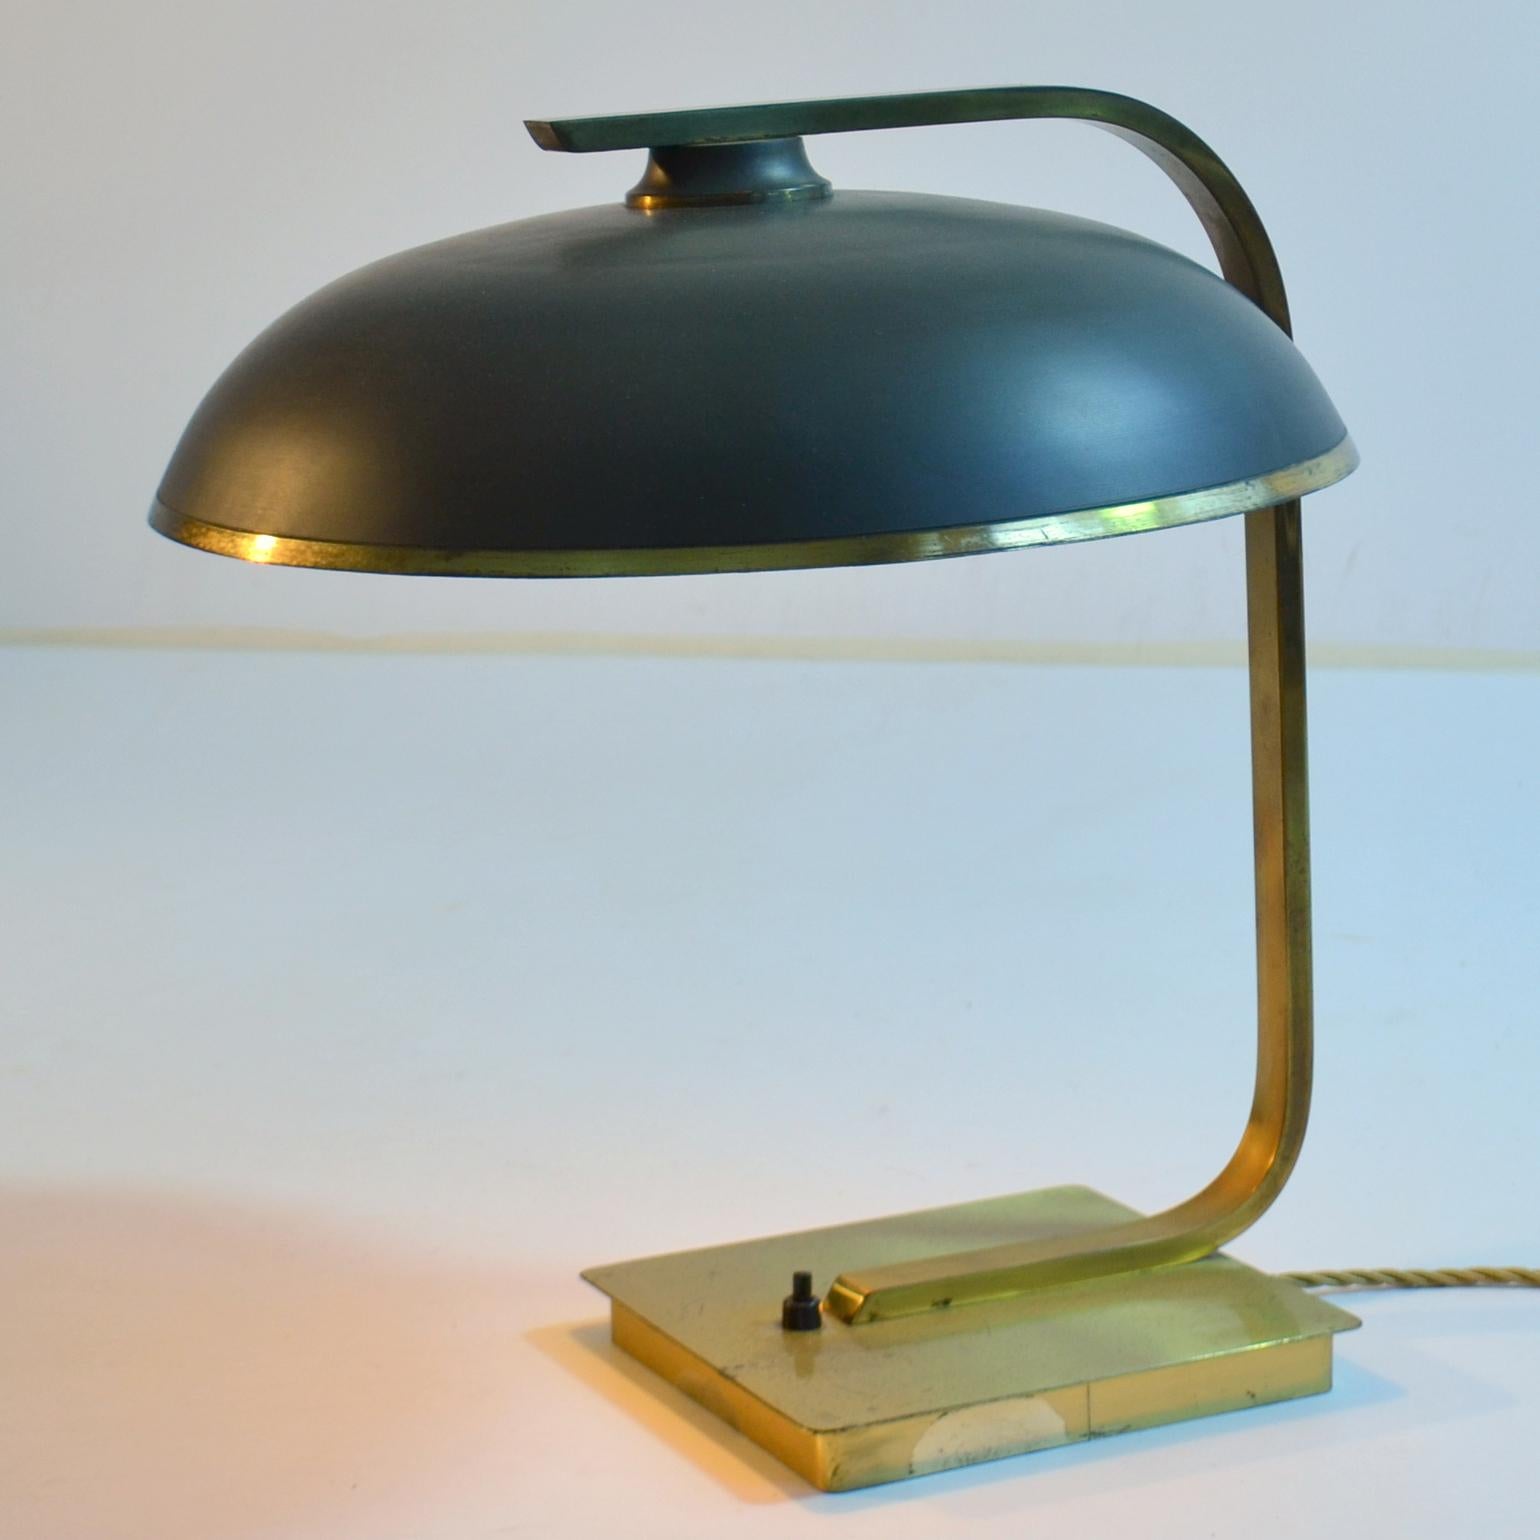 Modernist brass desk lamp with patinated brown round shade edged in shiny brass is held on a brass angular arm that connects to a square brass base in the style of Bauhaus is made in the 1950's.